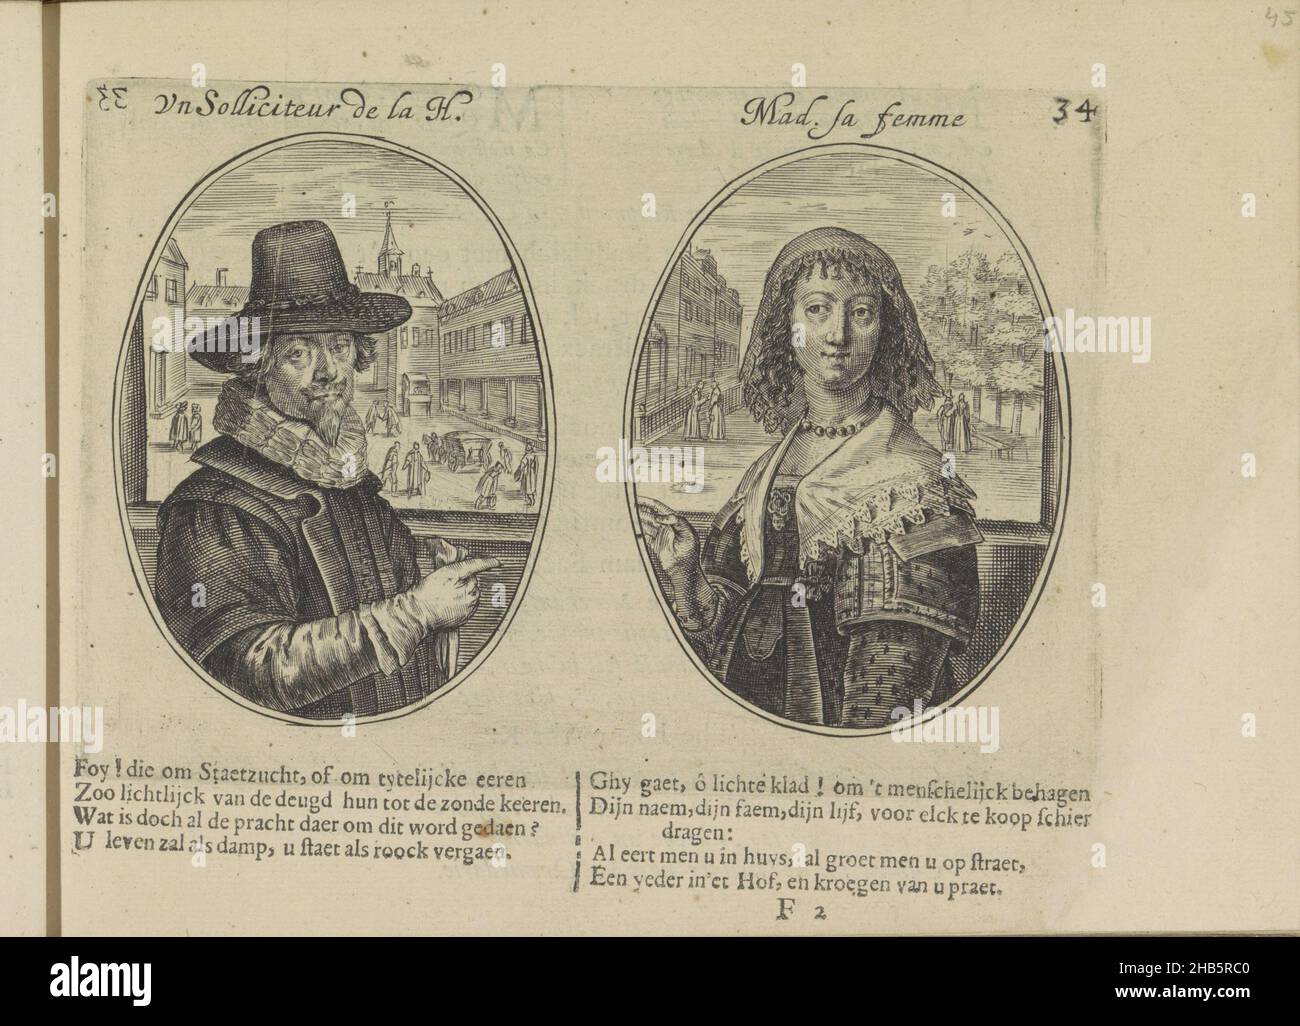 Solliciteur from The Hague and his wife, Un solliciteur de la H., Mad. sa femme (title on object), Les abus du mariage (series title), Two representations on an album leaf. On the left, the fictitious portrait of a solliciteur from The Hague, an advocate of small lawsuits. Behind him a view of the Binnenhof. To the right his wife with possibly the Lange Voorhout in the background. Below that, two quatrains in Dutch. The print is part of an album., print maker: Crispijn van de Passe (II), publisher: Crispijn van de Passe (II), Amsterdam, 1641, paper, engraving, letterpress printing, height 104 Stock Photo